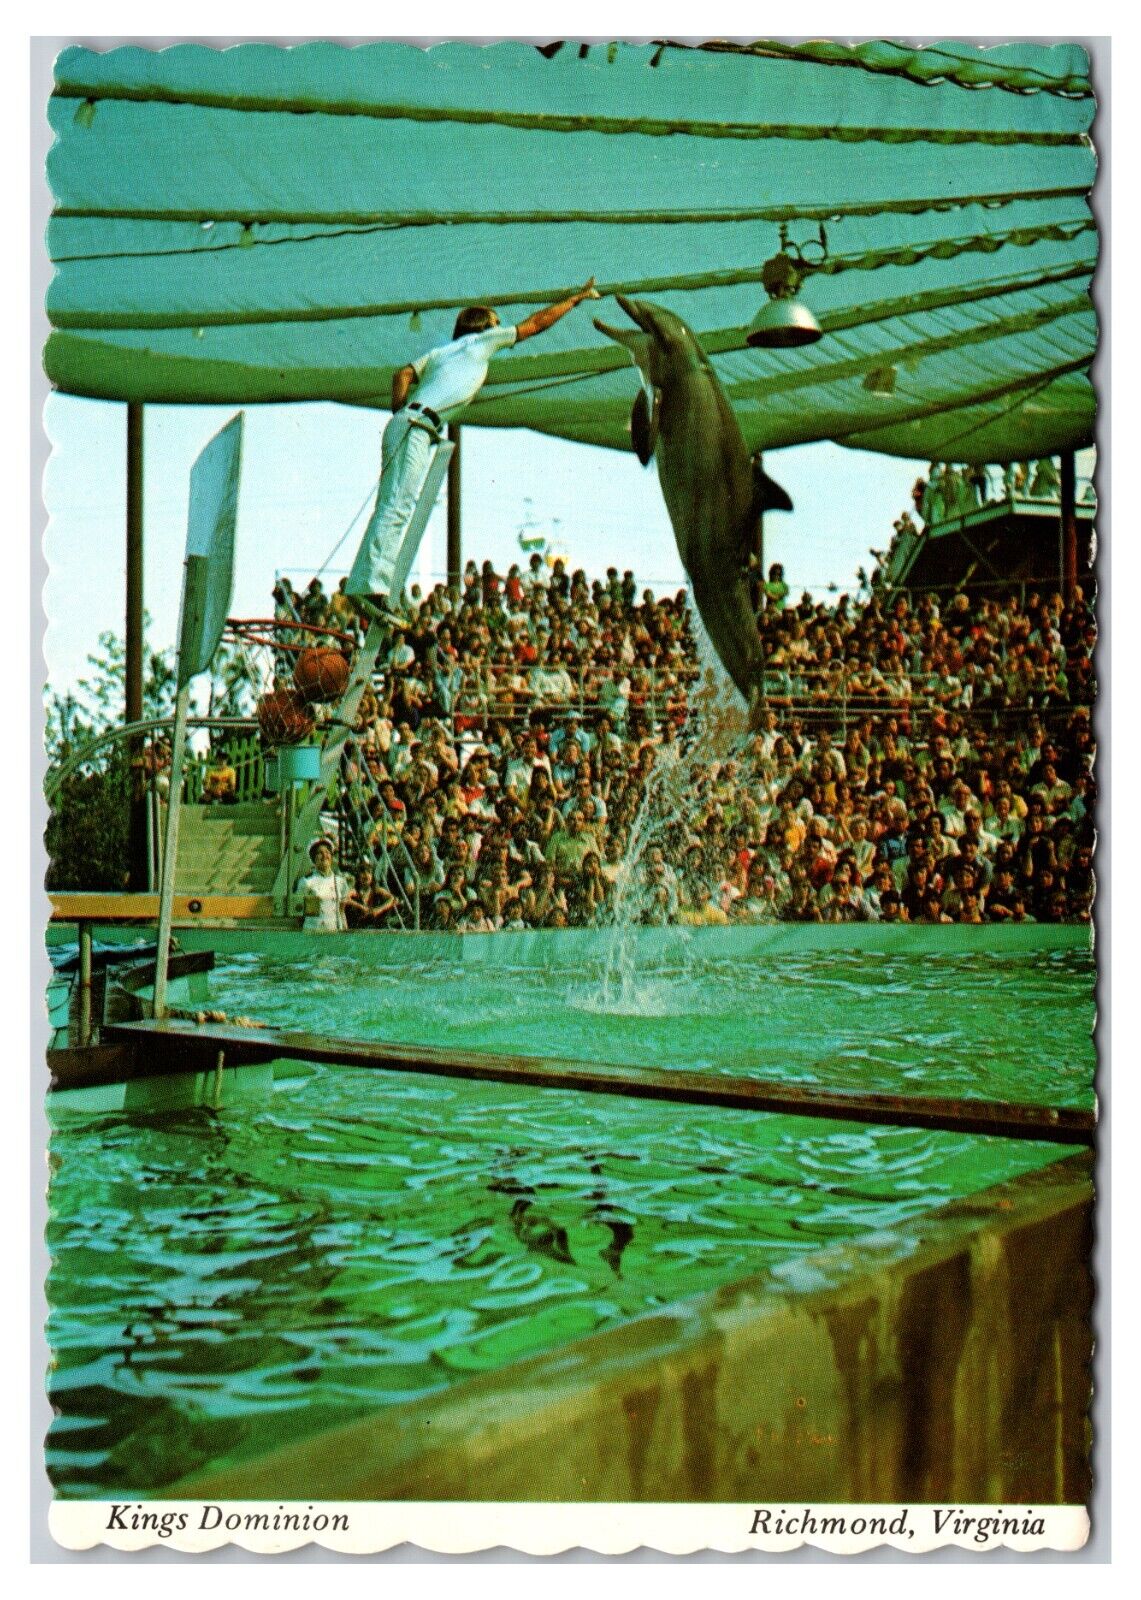 1970s - Dolphin Show At Kings Dominion - Richmond, Virginia Postcard (UnPosted)